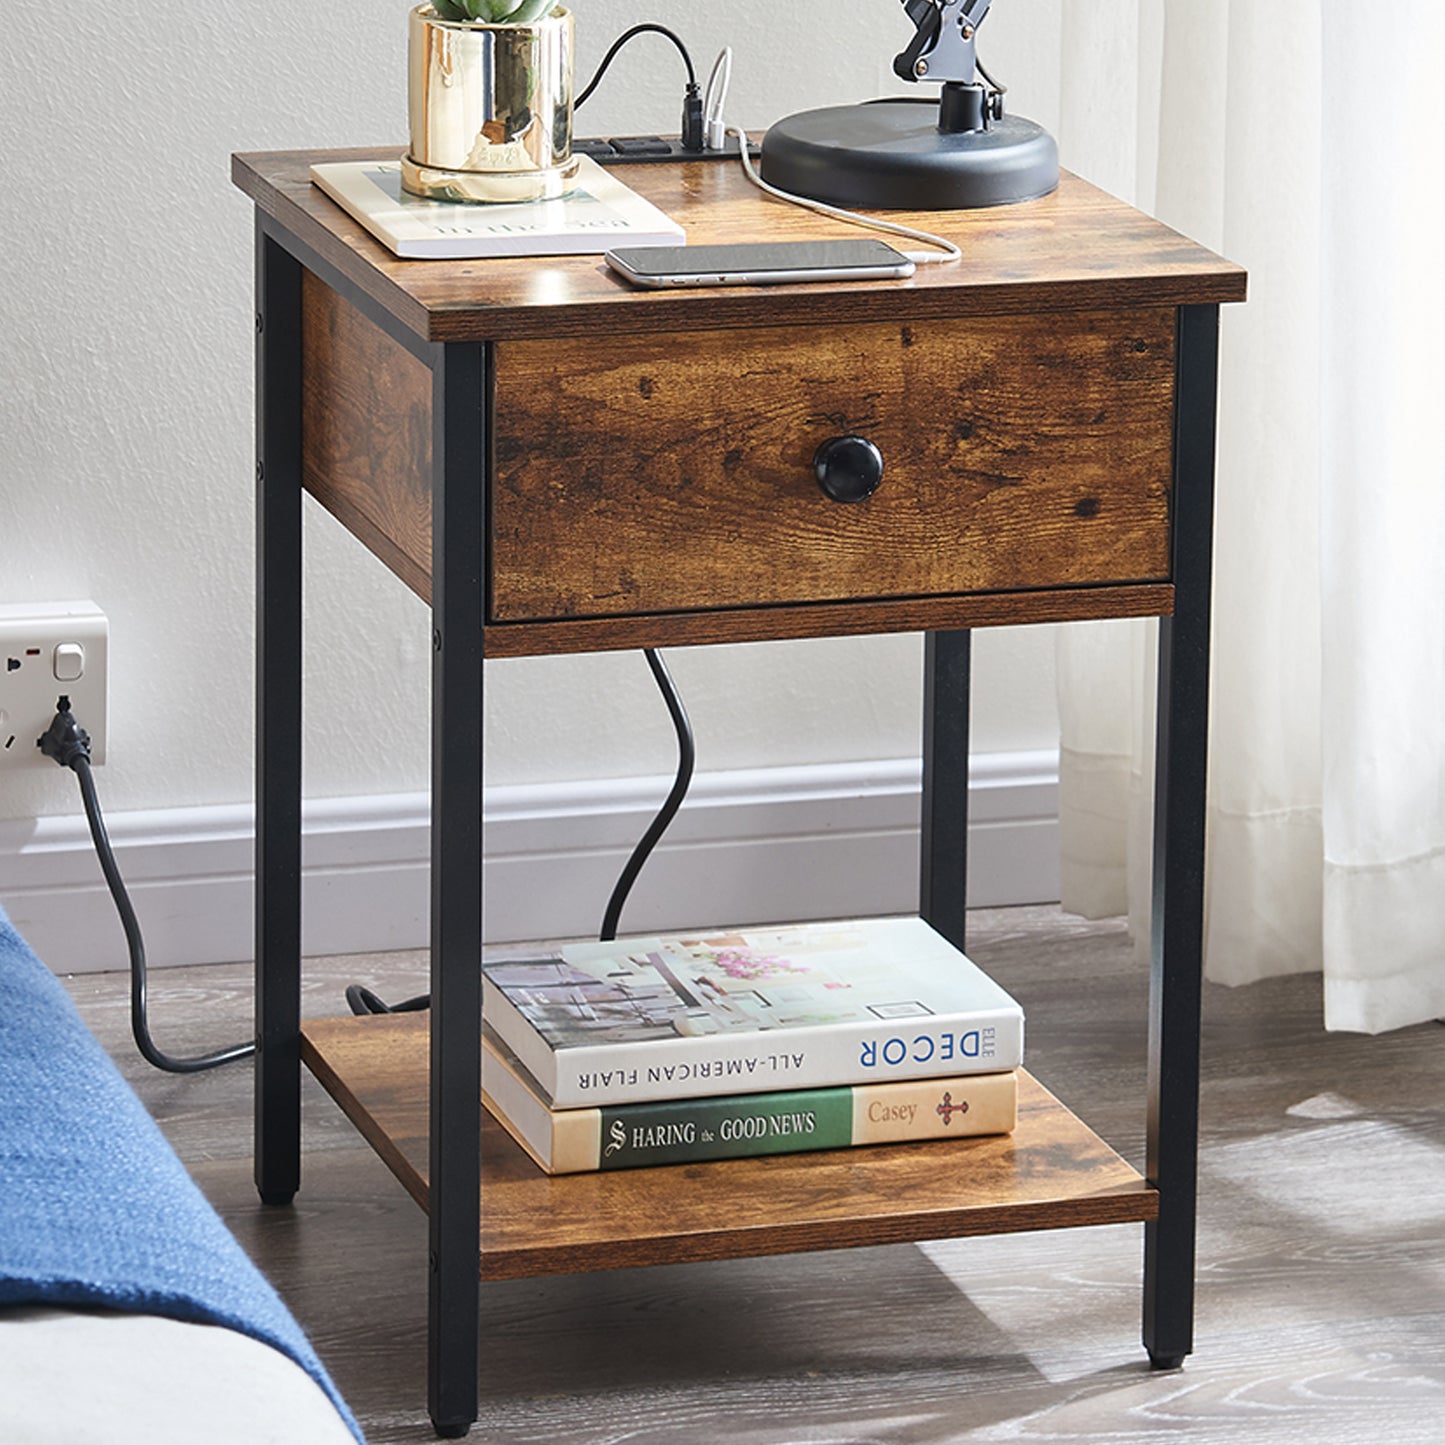 SUPERJARE Nightstand with Charging Station and USB Ports, 8602F